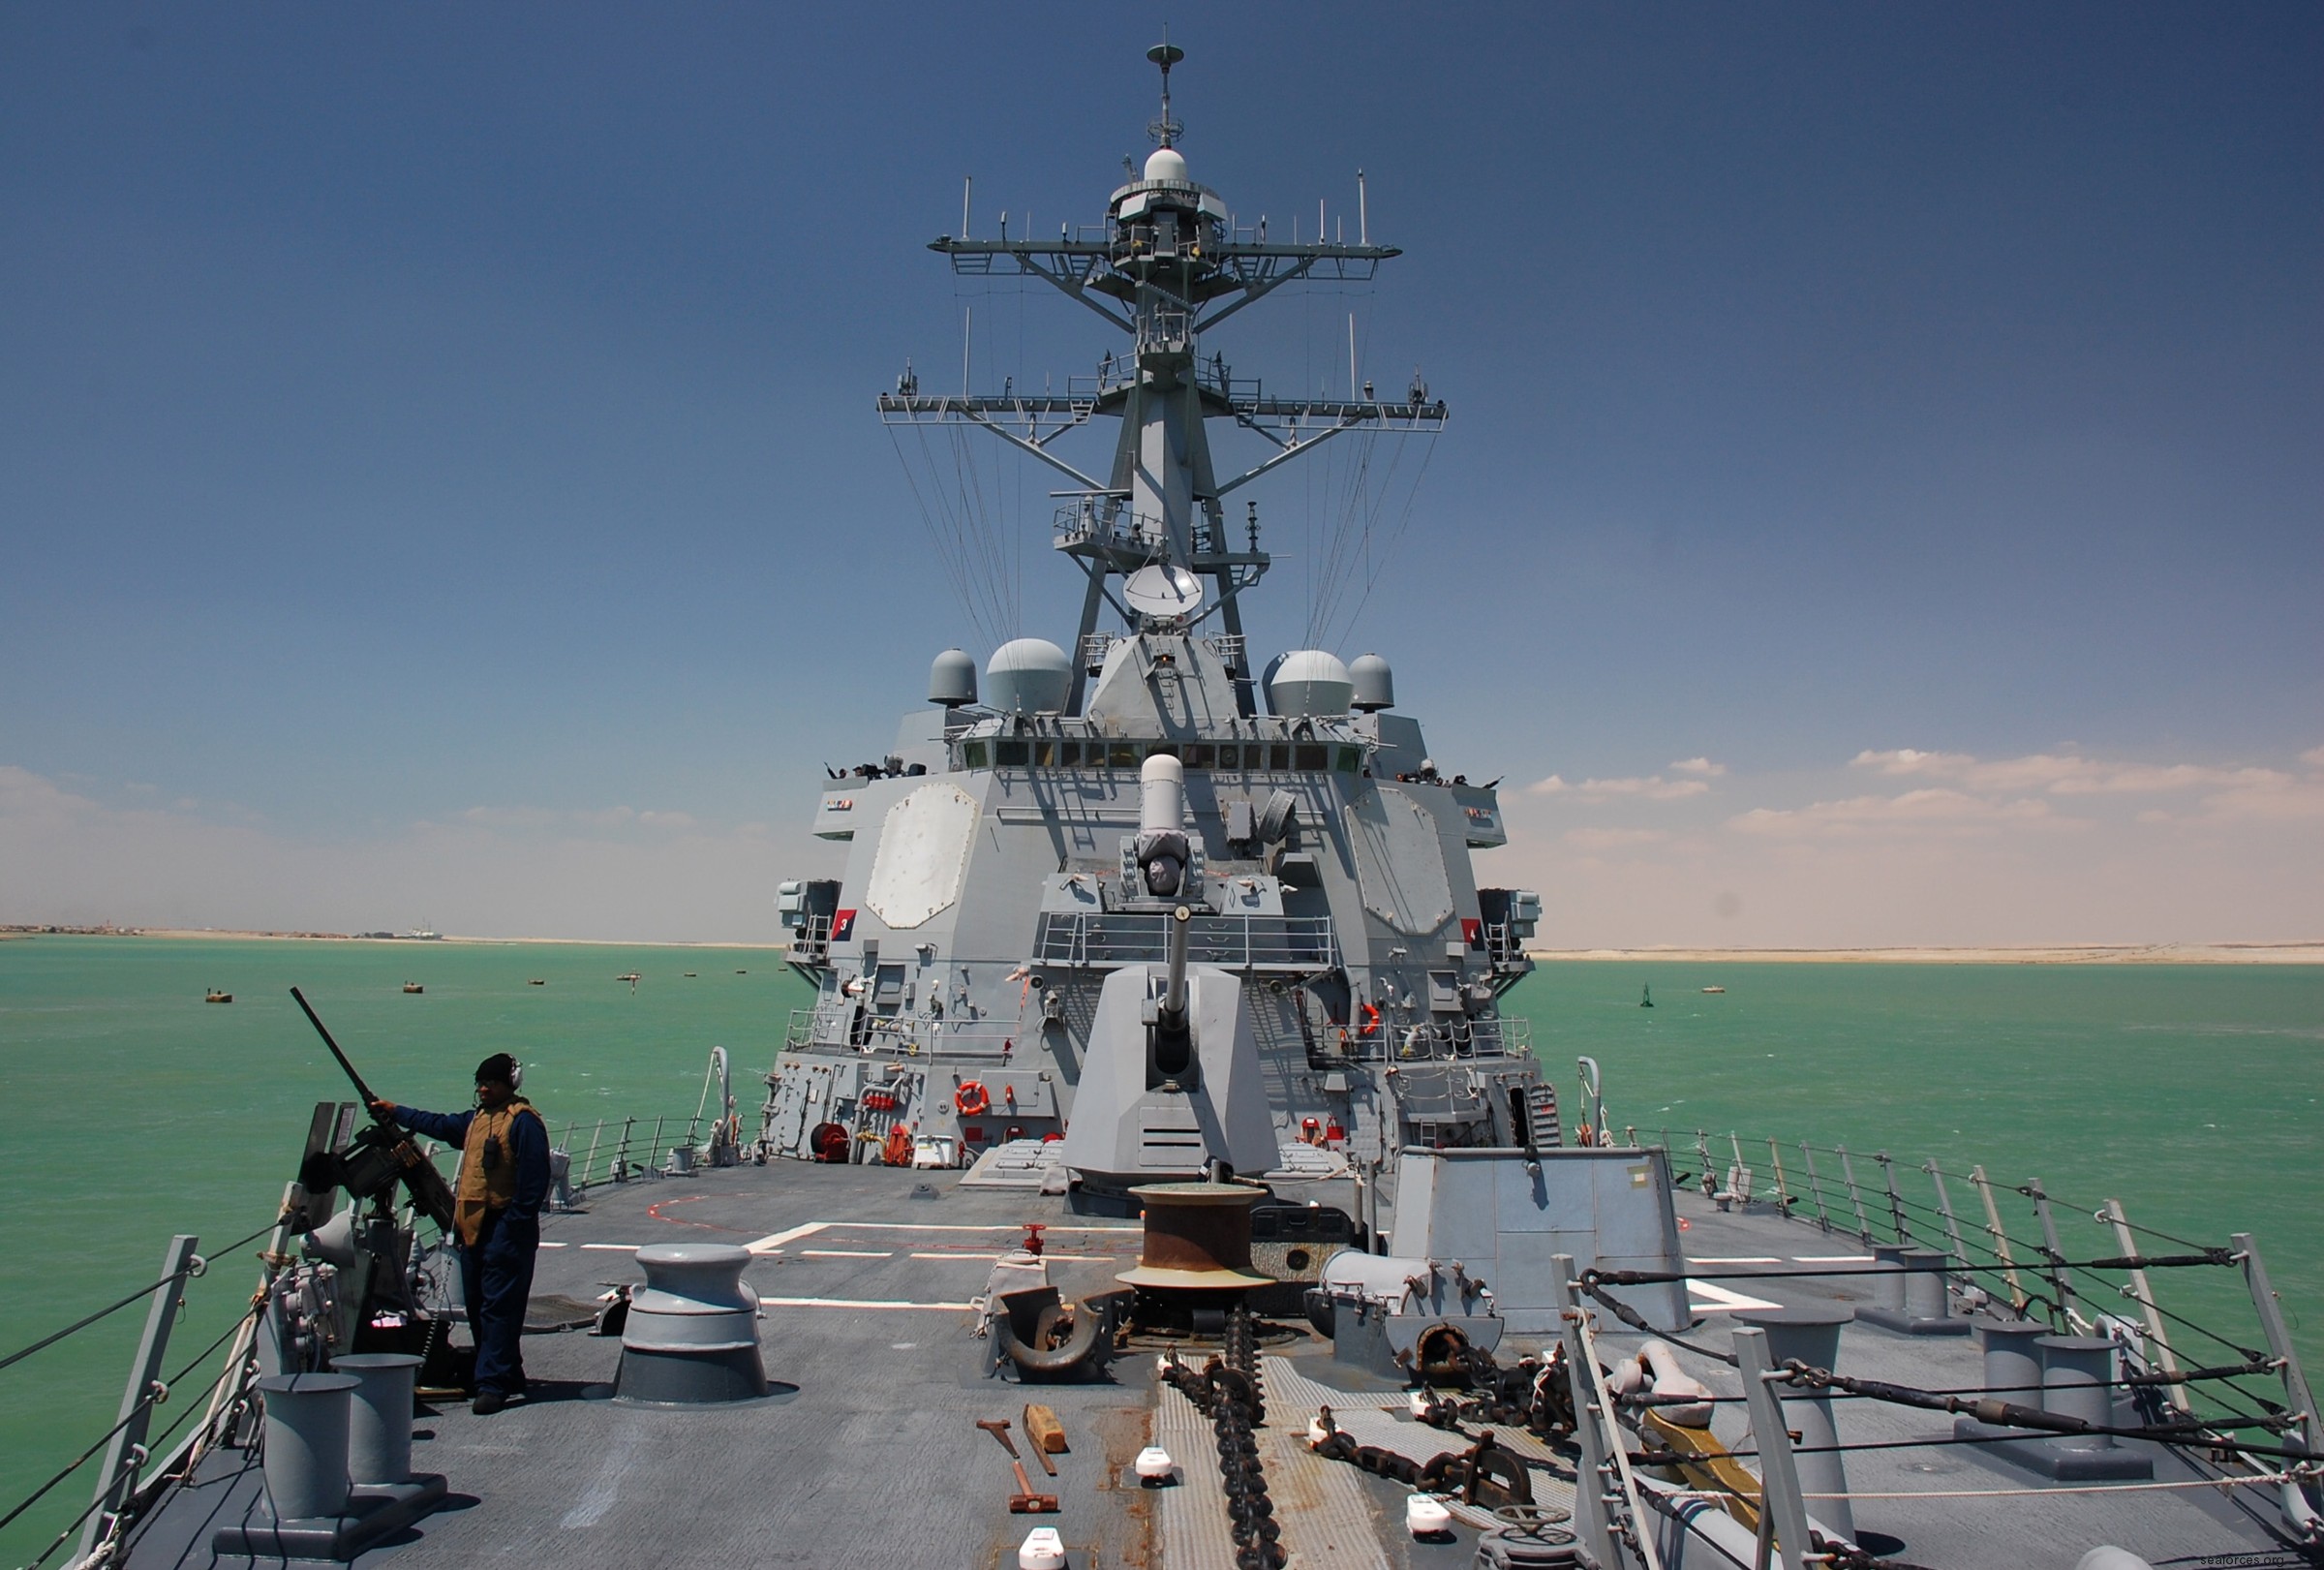 ddg-80 uss roosevelt guided missile destroyer arleigh burke class us navy 25 suez canal